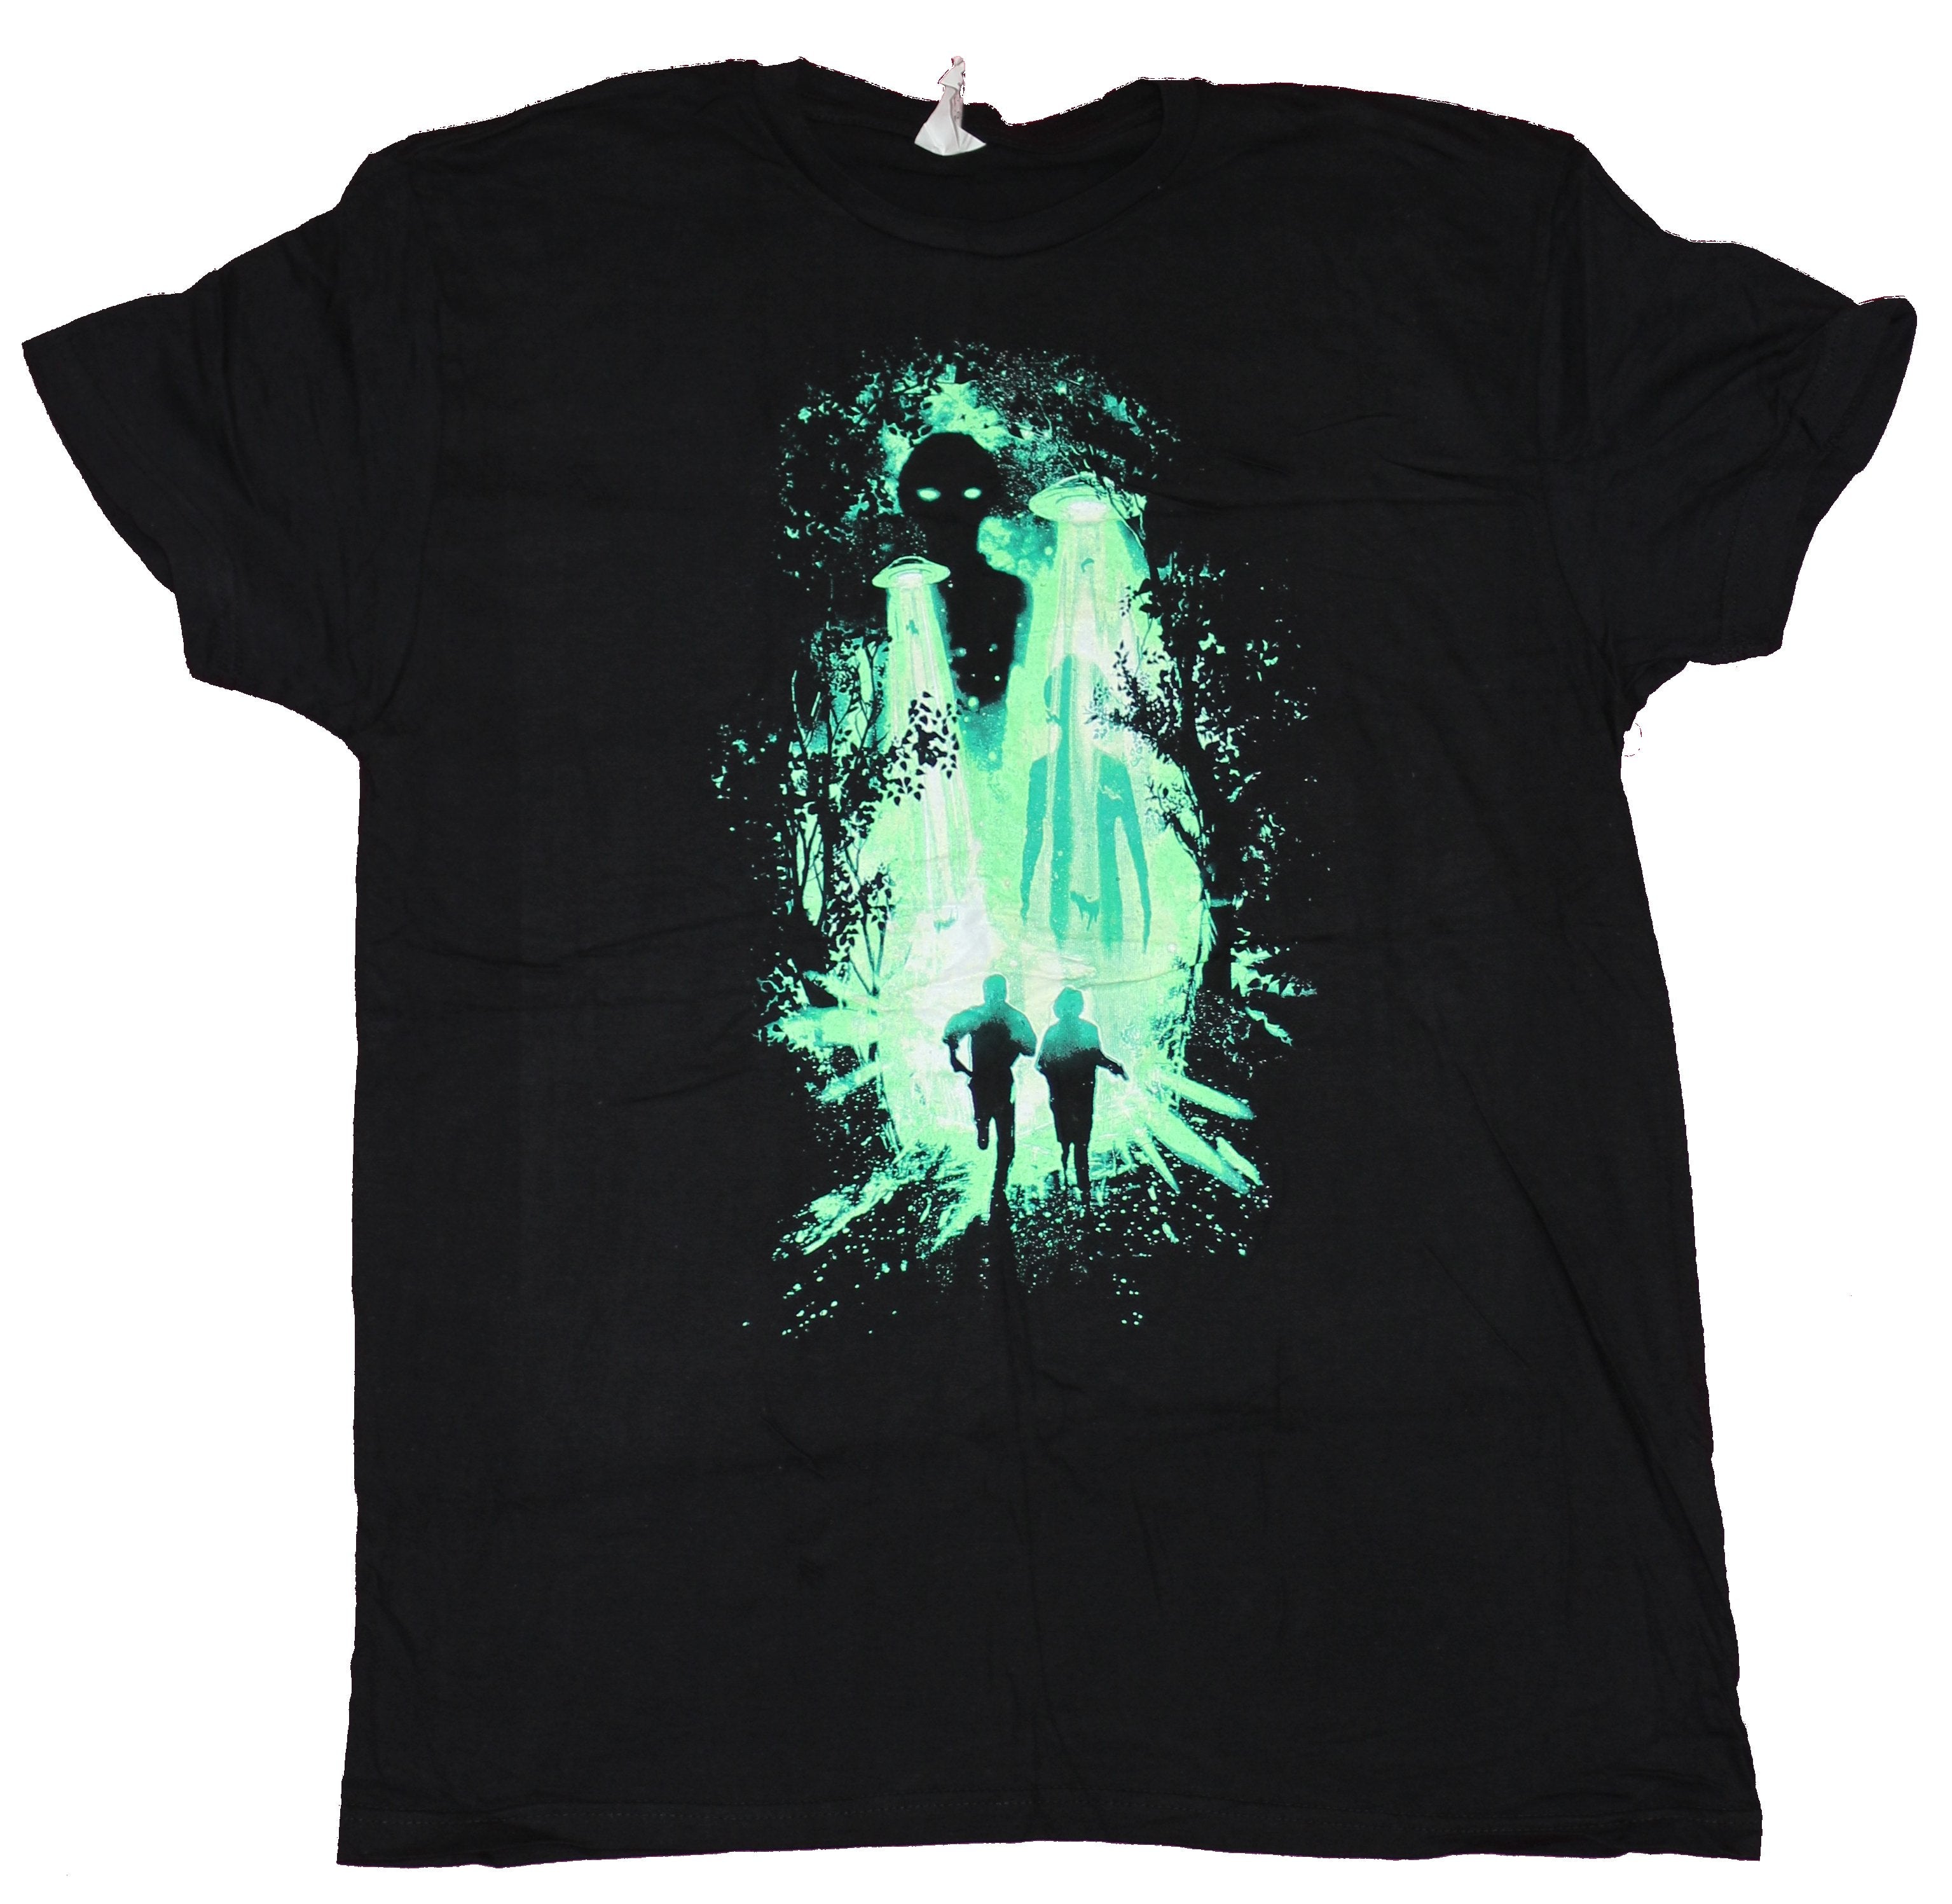 X-Files Mens T-Shirt- Woods Running From Beaming Saucers Image